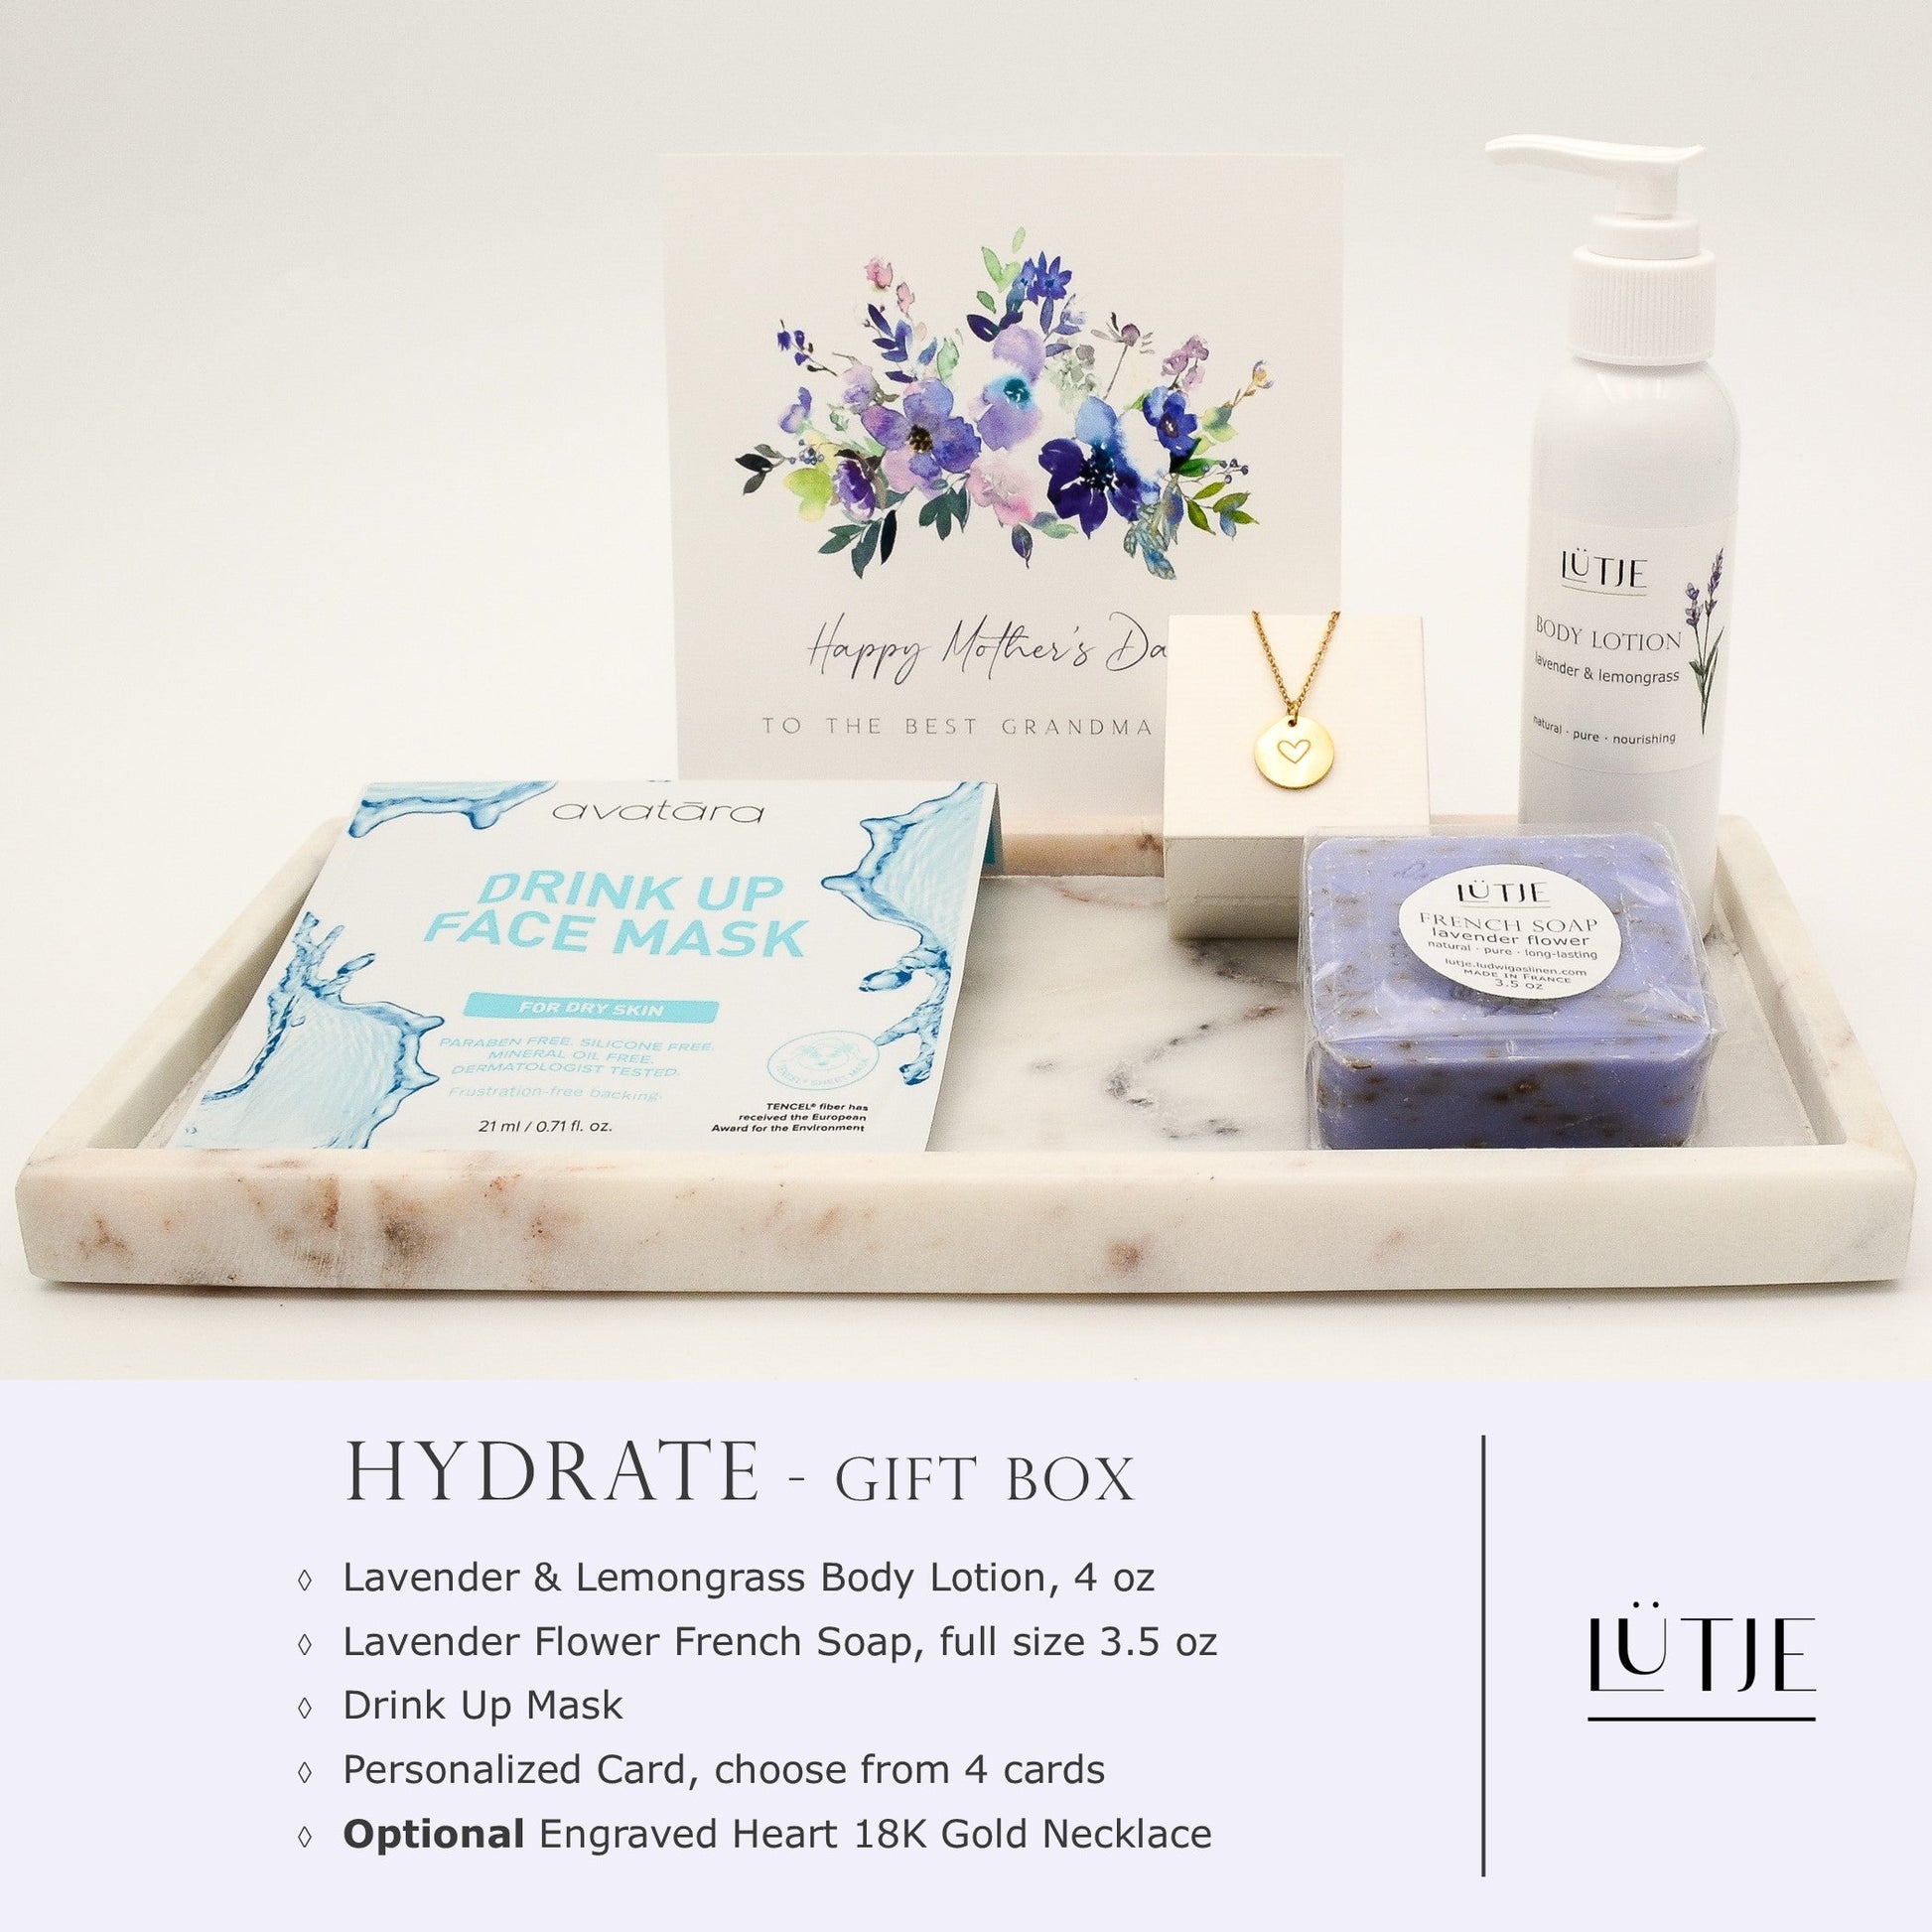 Hydrate Gift Box for women, daughter, mom, BFF, wife, sister or grandma, includes Lavender & Lemongrass body lotion, French soap, hydrating face mask, and optional 18K gold-plated necklace with engraved heart.